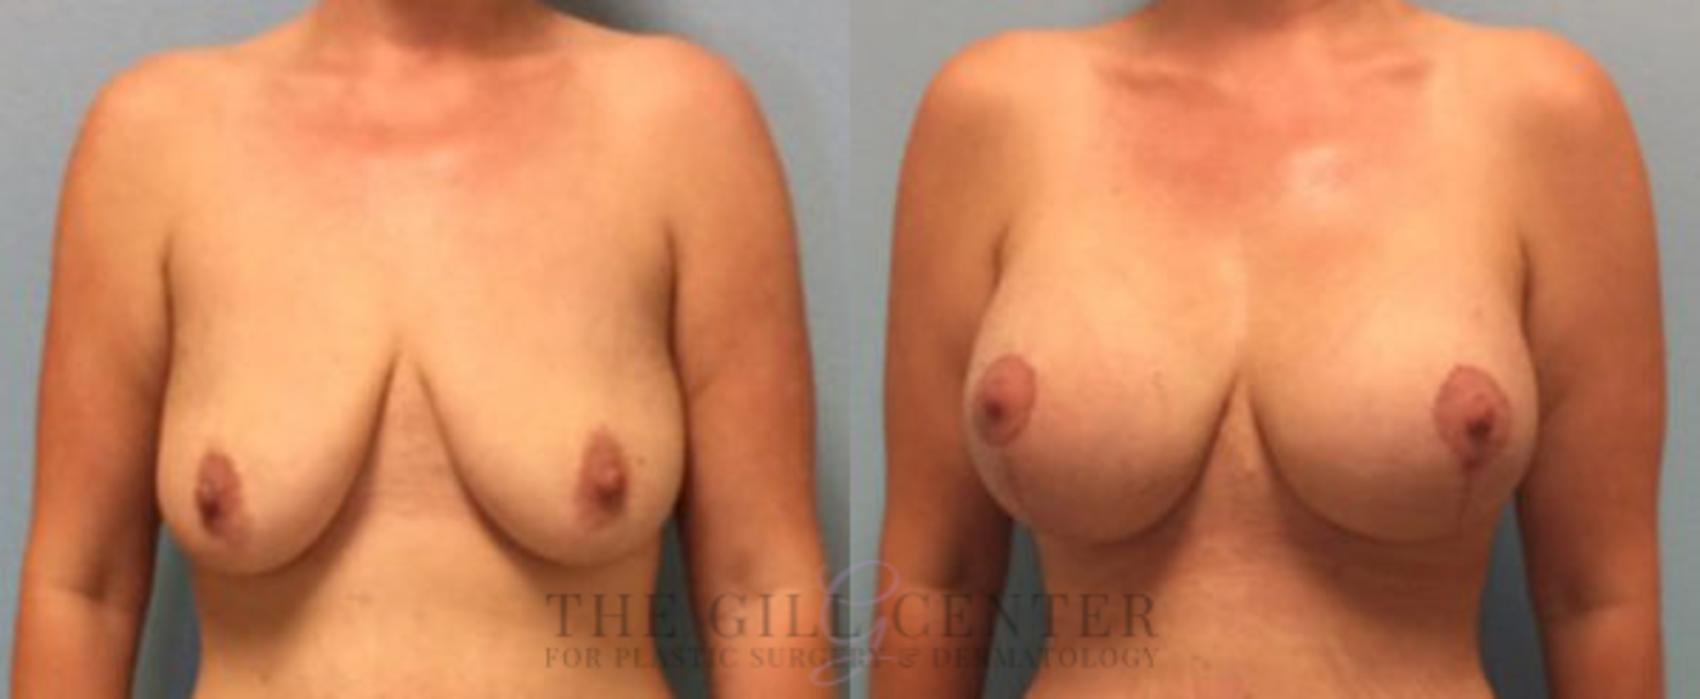 Breast Lift with Implants Case 95 Before & After Front | The Woodlands, TX | The Gill Center for Plastic Surgery and Dermatology